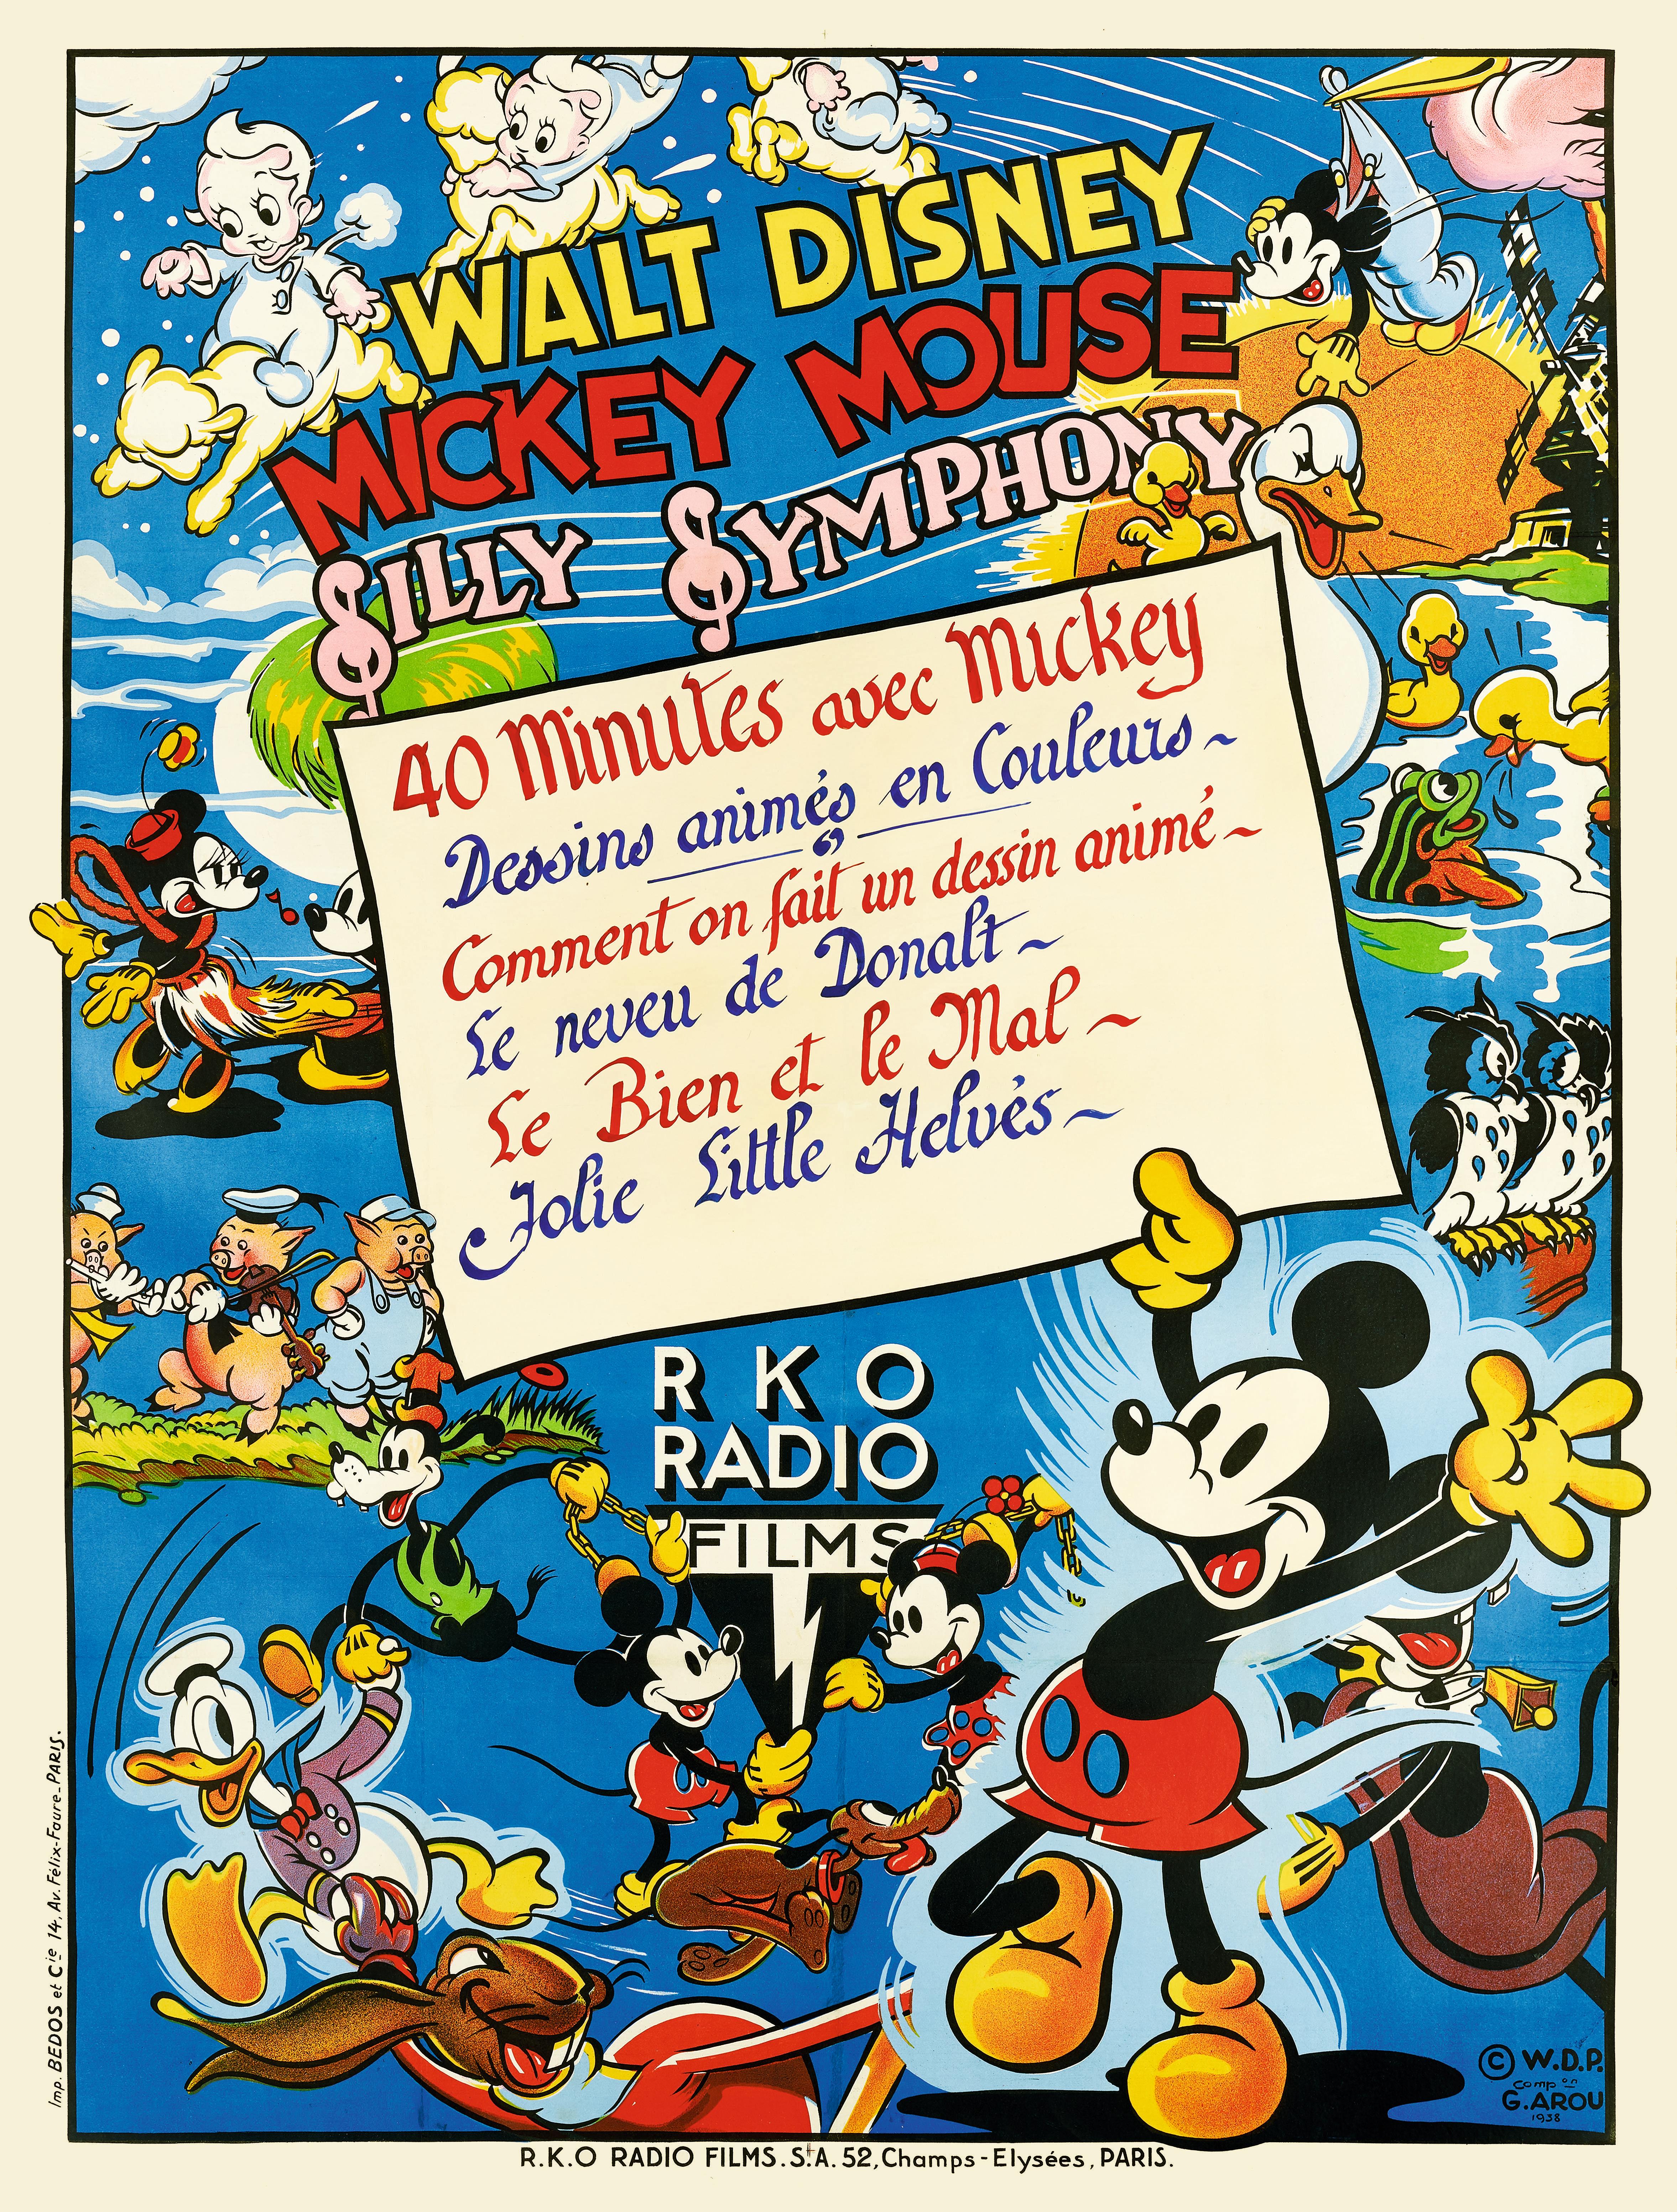 Original French film poster for Mickey Mouse - Silly Symphony 1938. To-date this is believed to be the only known surviving example.
The Silly Symphonies were a series of seventy-five short animations produced by Walt Disney, which started in 1929